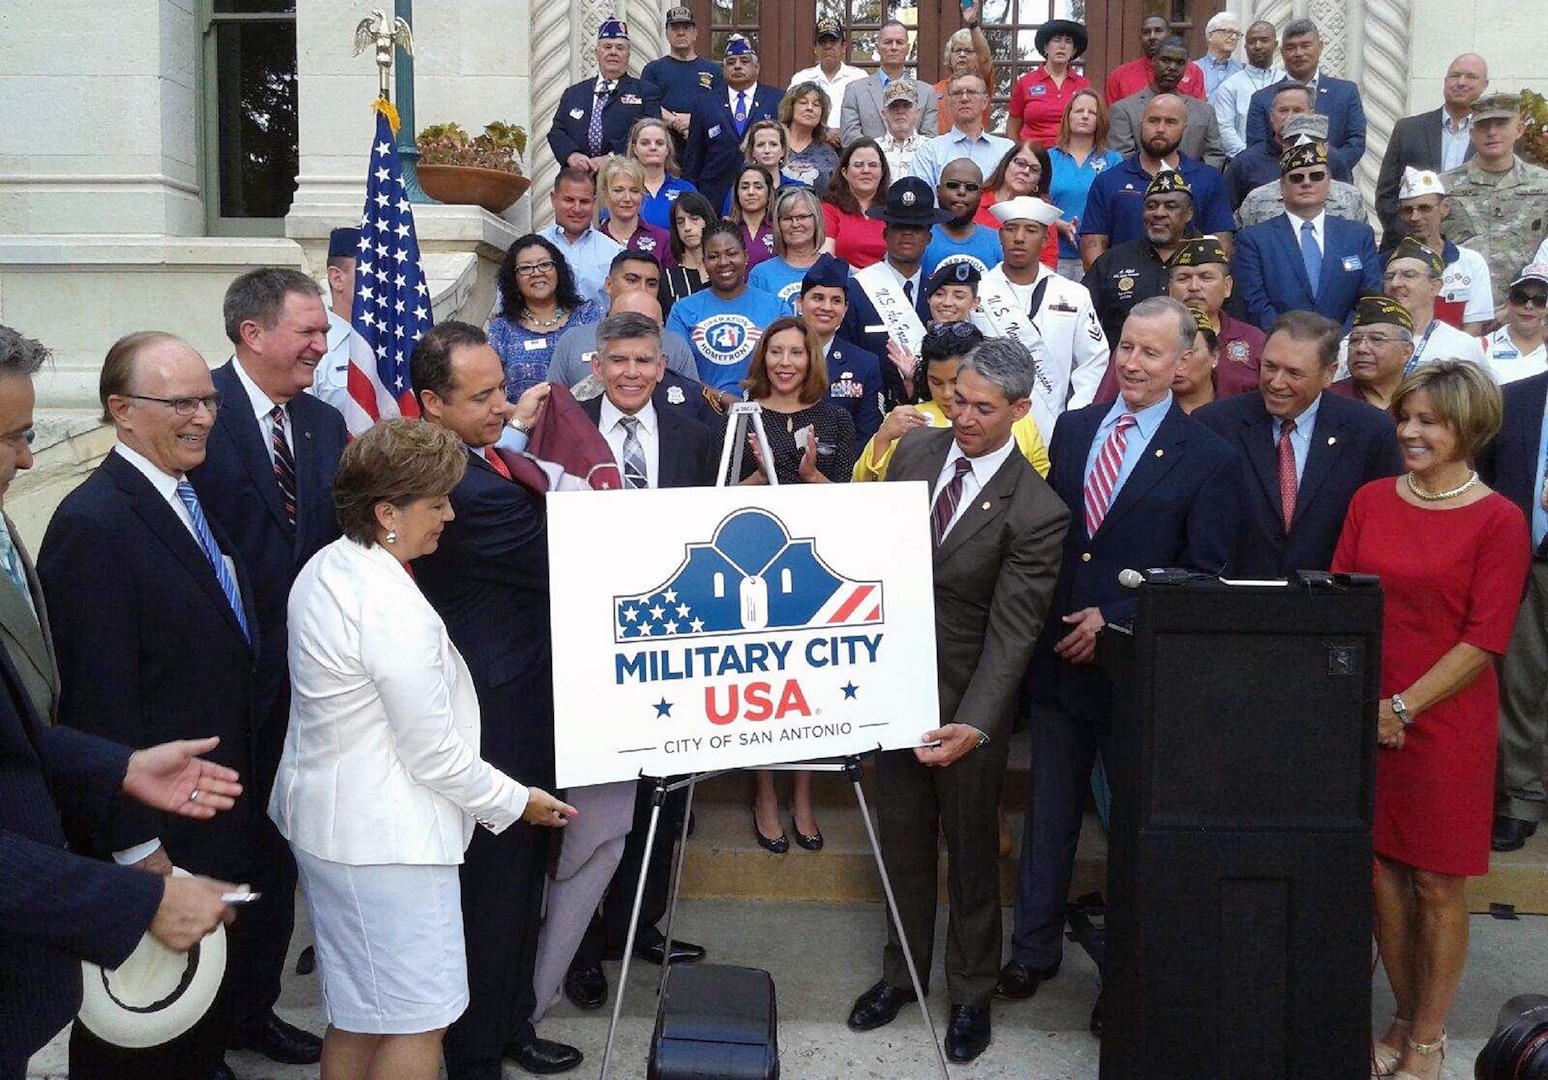 City of San Antonio Mayor-Elect Ron Nirenberg and others pose with the newly revealed official logo for "Military City USA" during a ceremony at City Hall June 19. “For years many have referred to San Antonio as Military City, USA and now we are officially a registered trademark, a name that no other city can claim.  Our relationship with the military is one of the many reasons our city continues to prosper and we are proud to celebrate this historic announcement,” Nirenberg said. “Thank you to the entire military community, their families, and the service men and women who call San Antonio home.”